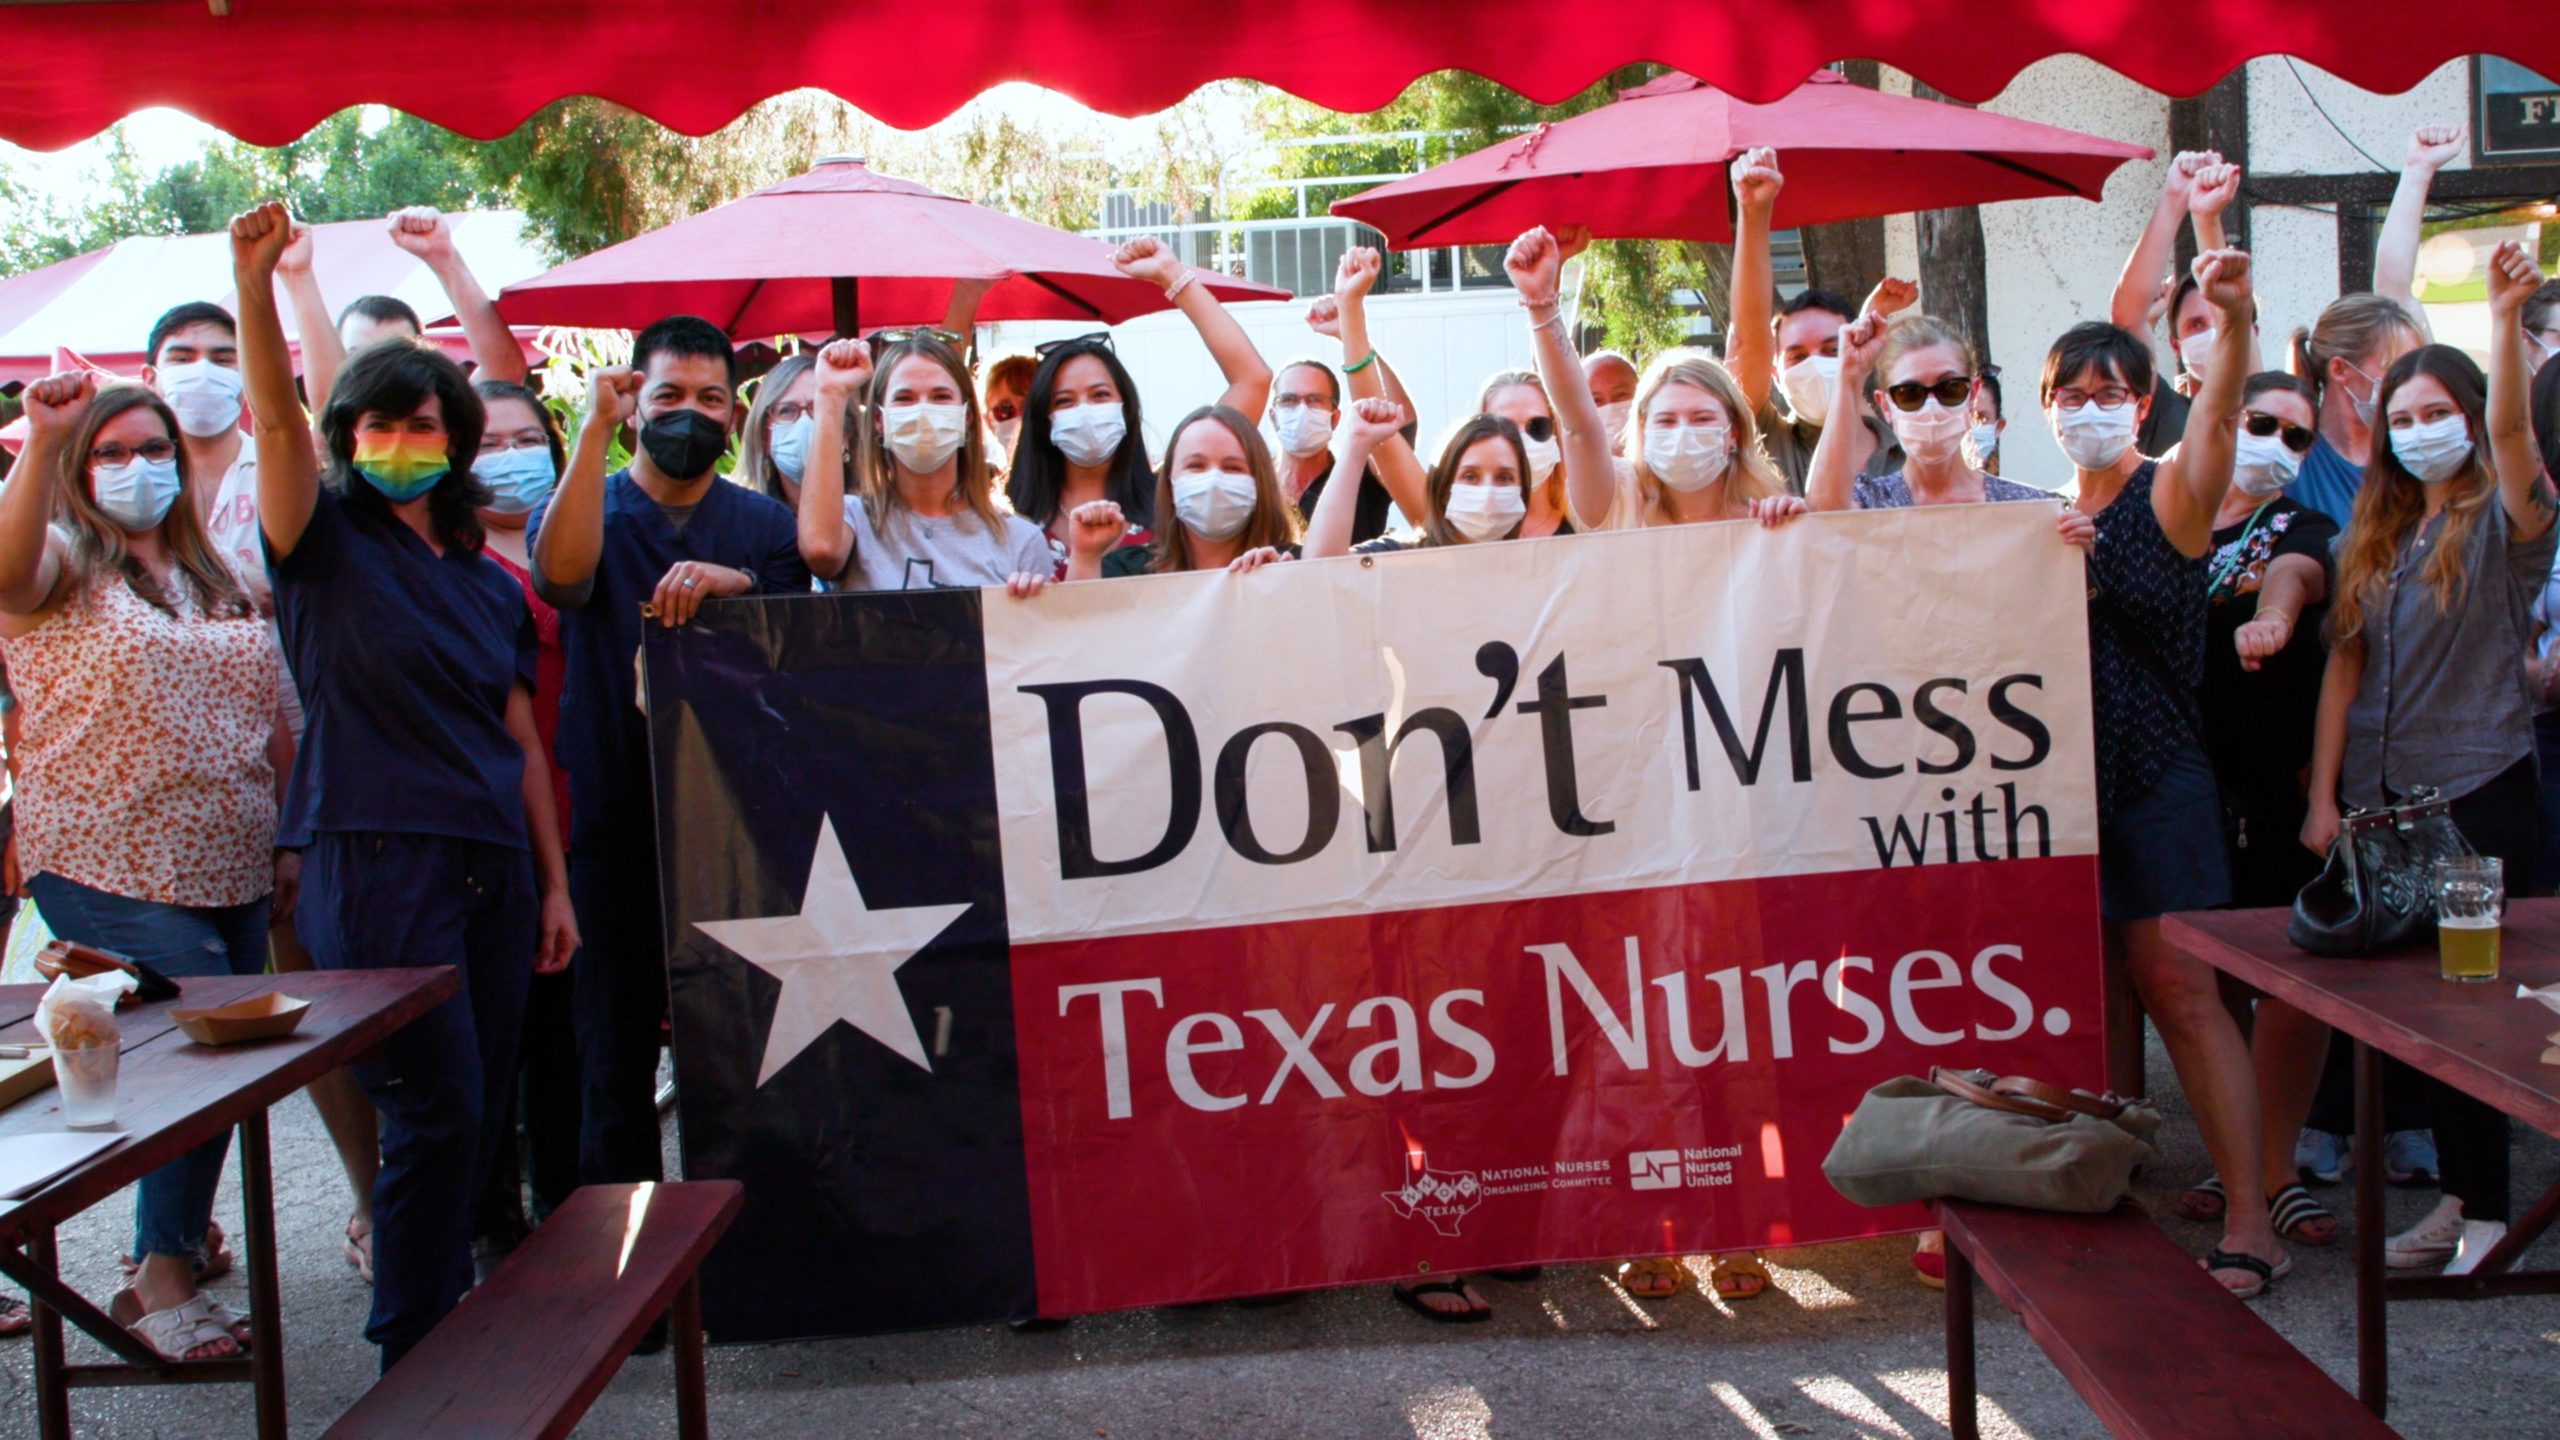 National Nurses United with sign, "Don't Mess With Texas Nurses"